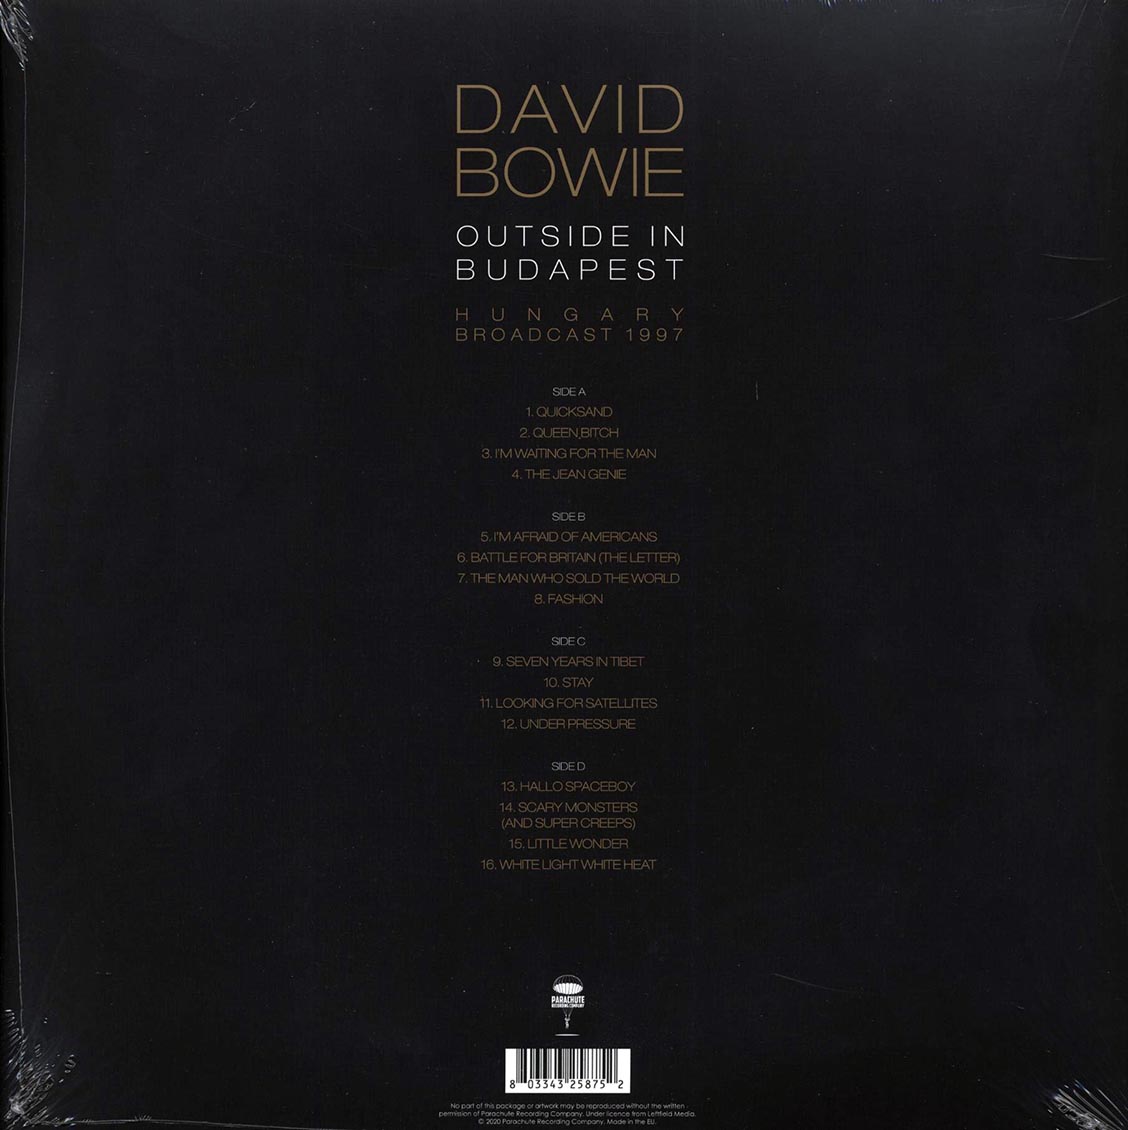 David Bowie - Outside In Budapest: Hungary Broadcast 1997 (2xLP) - Vinyl LP, LP